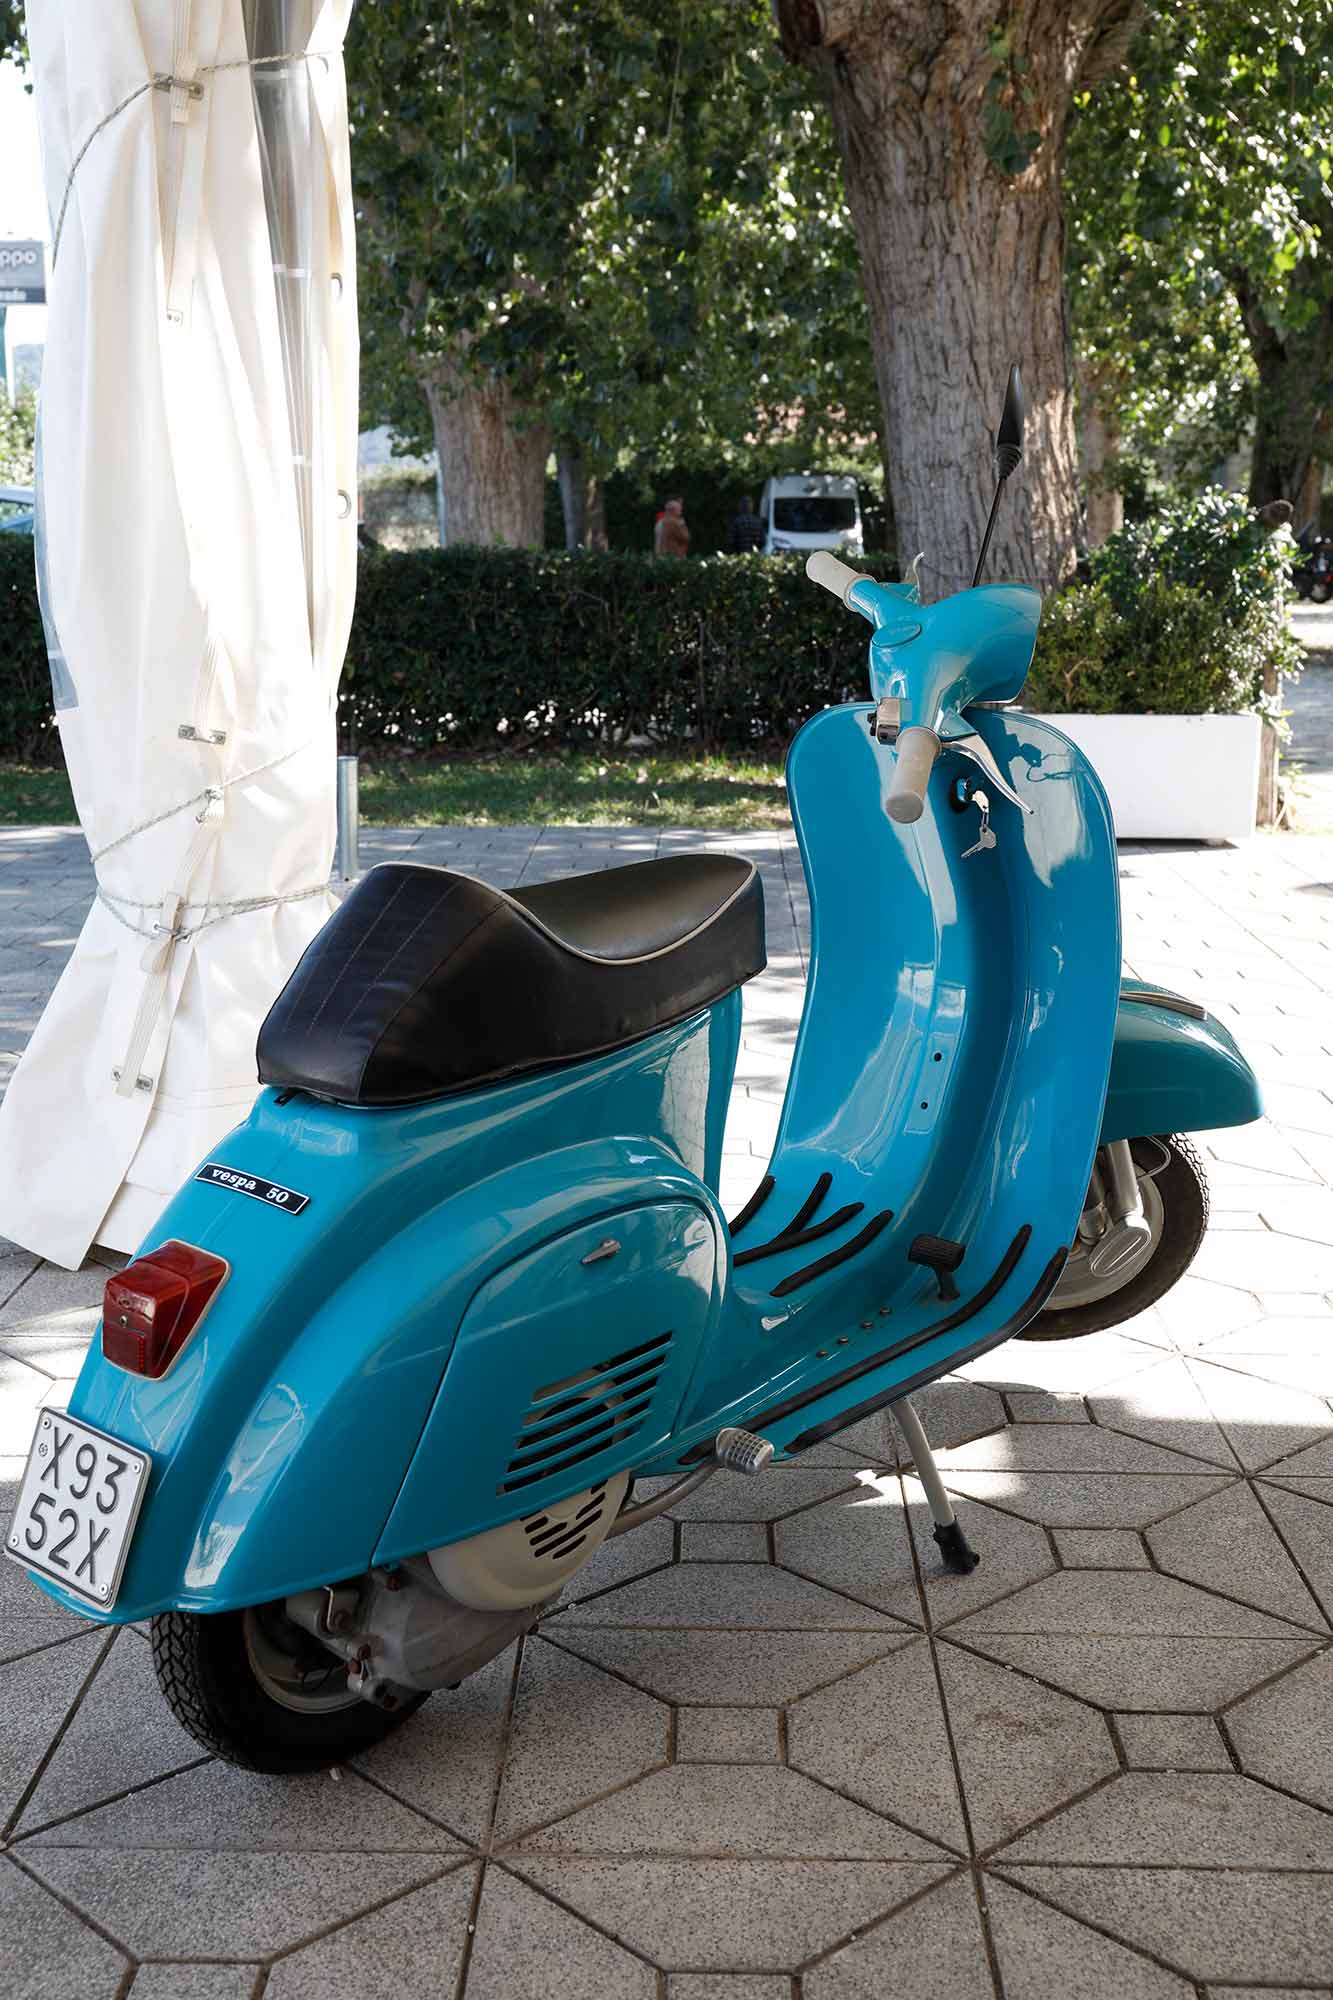 2023 Vespa GTS300 Review - First Ride